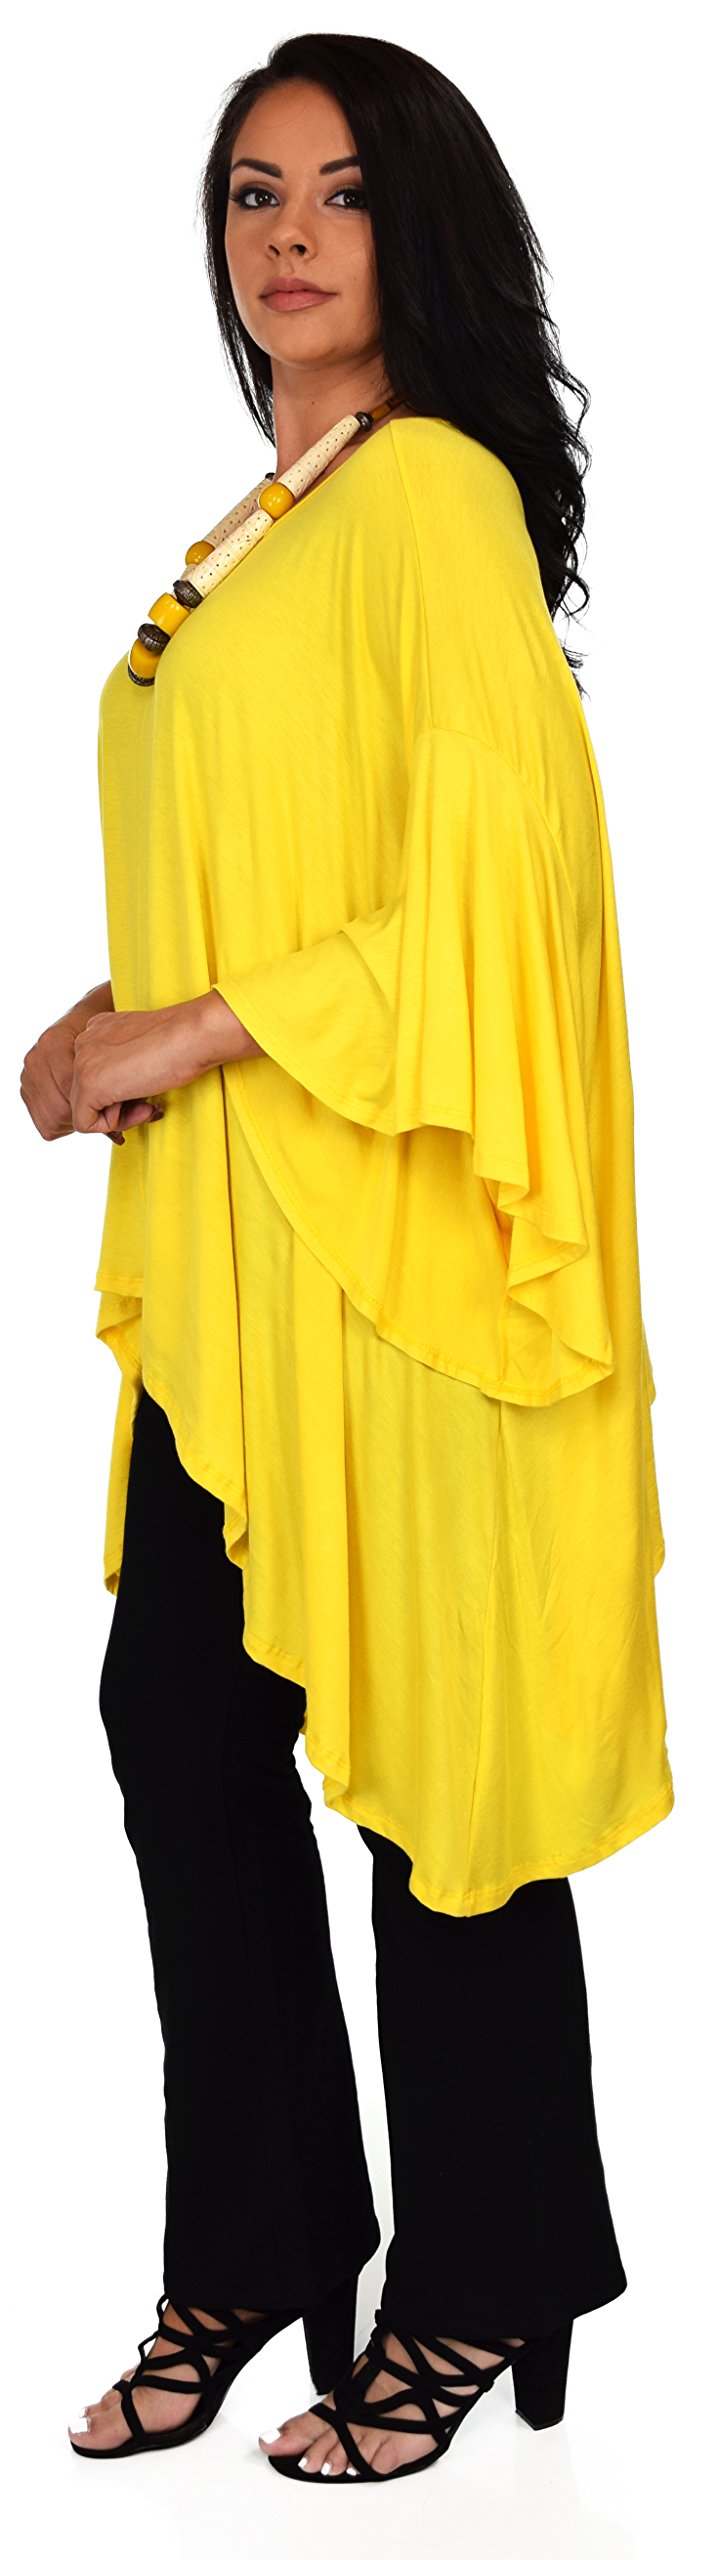 Asymmetrical Oversized Tunic , Full Figured Poncho Top, Plus Size Tunic top, Top Cover Up w/ Butterfly Sleeves